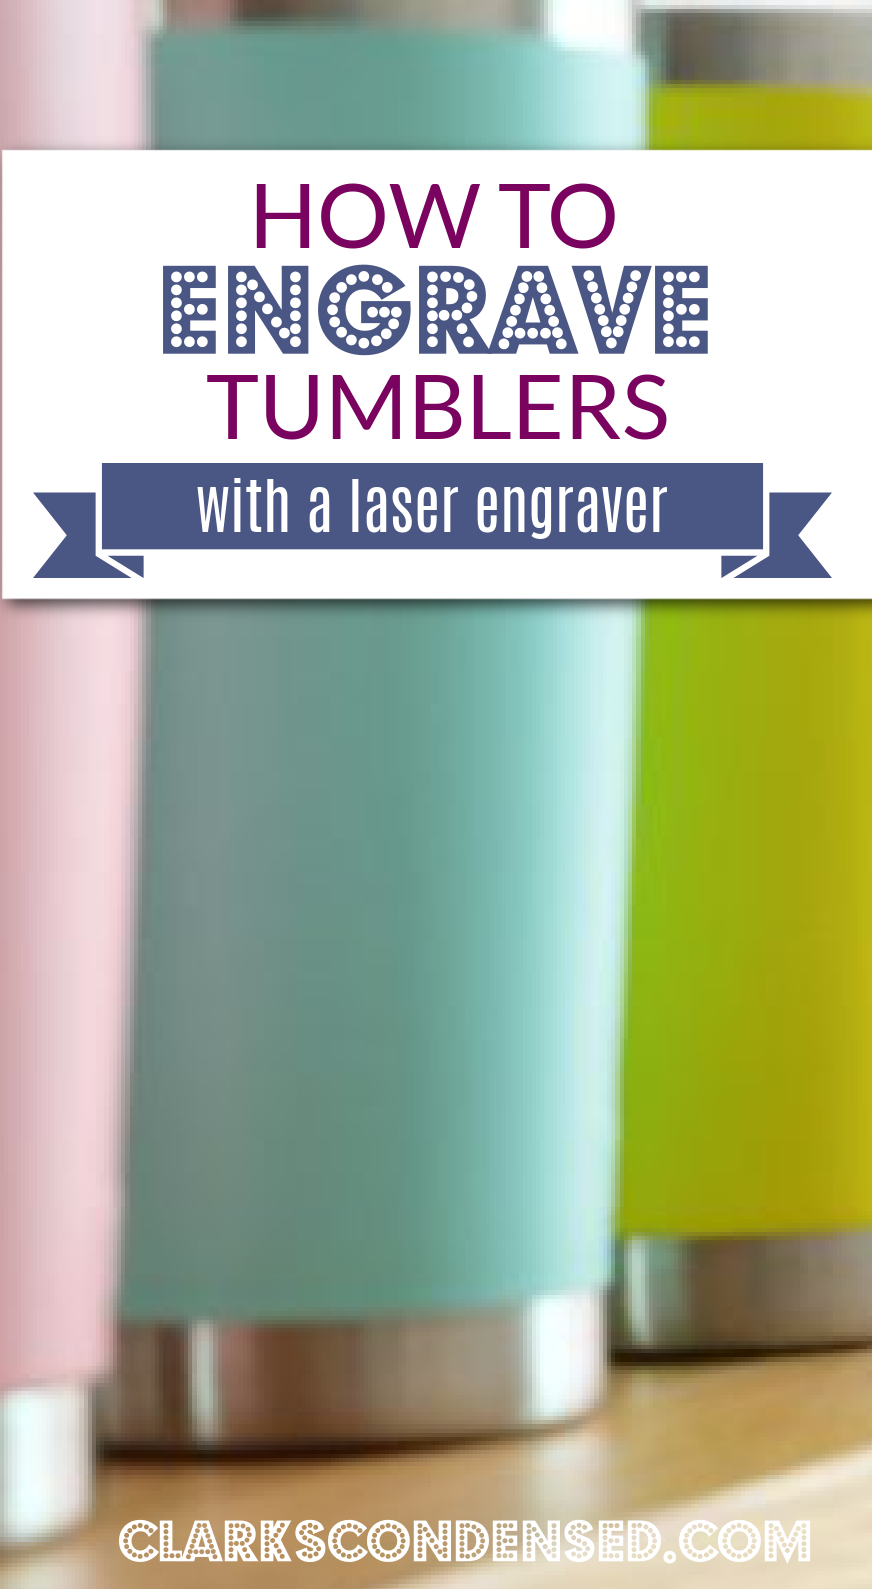 How to Use Your Laser Engraver for Tumblers